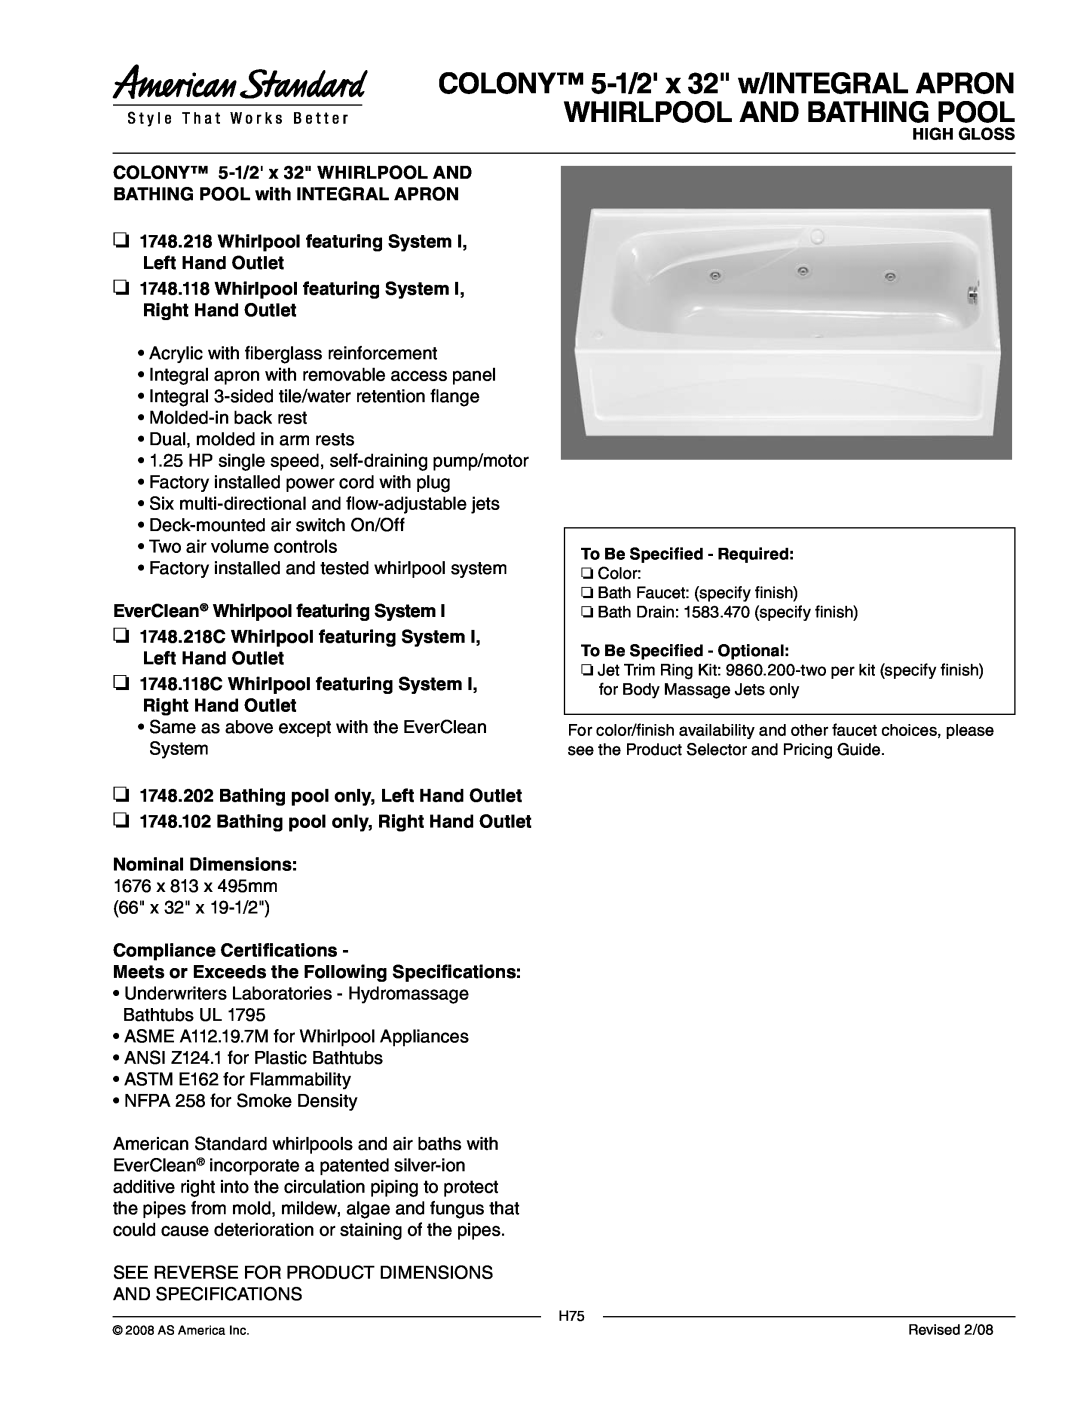 American Standard 5-1/2' x 32 dimensions EverClean Whirlpool featuring System 